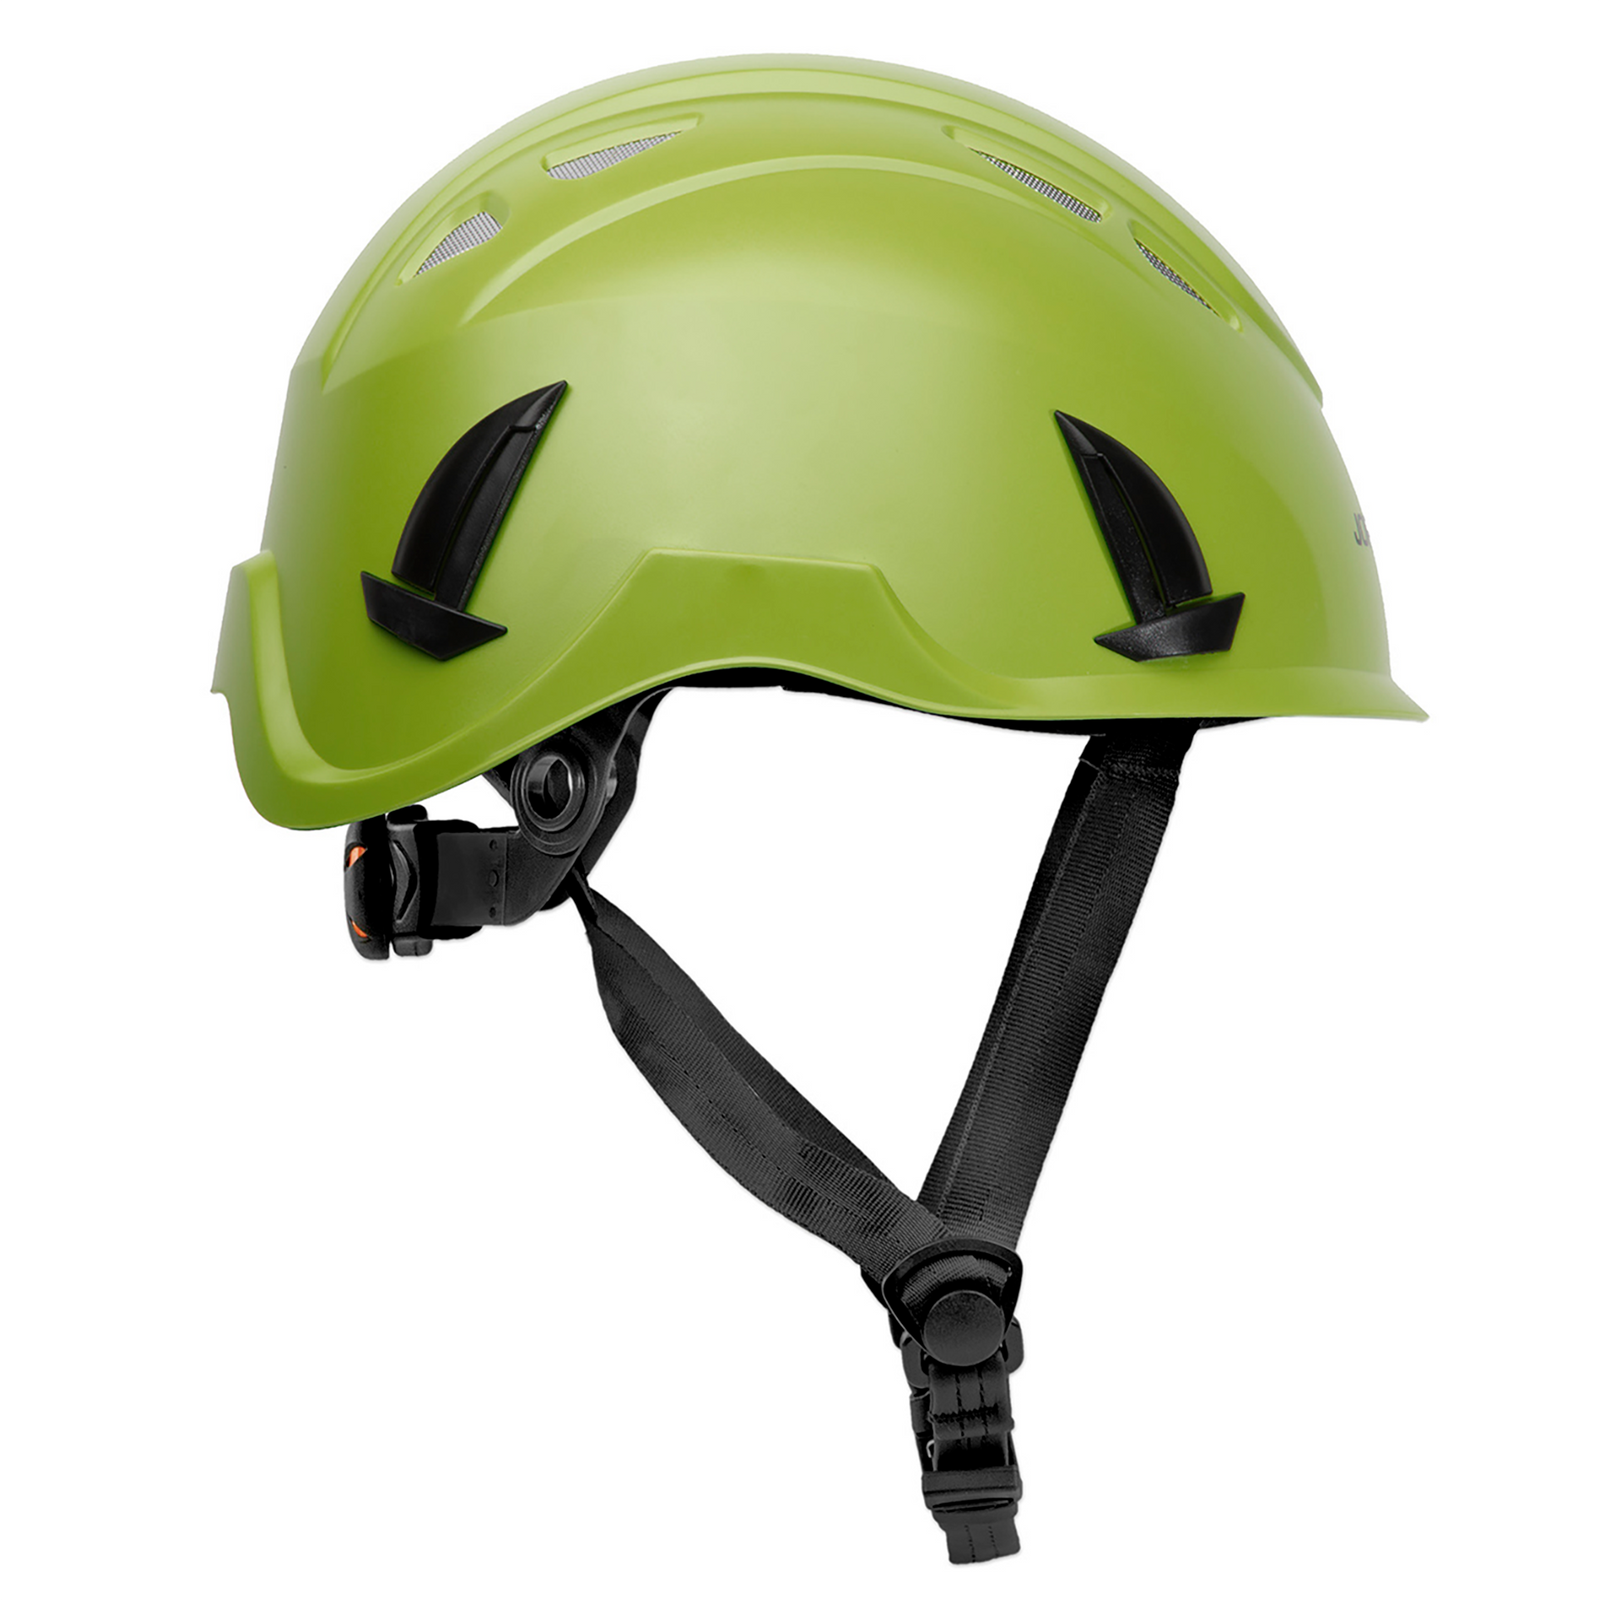 Side view of the lime/green Ventilated JORESTECH® hard hat class 1 type C with anti intrusion grille and adjustable 4 point suspension with black chin strap